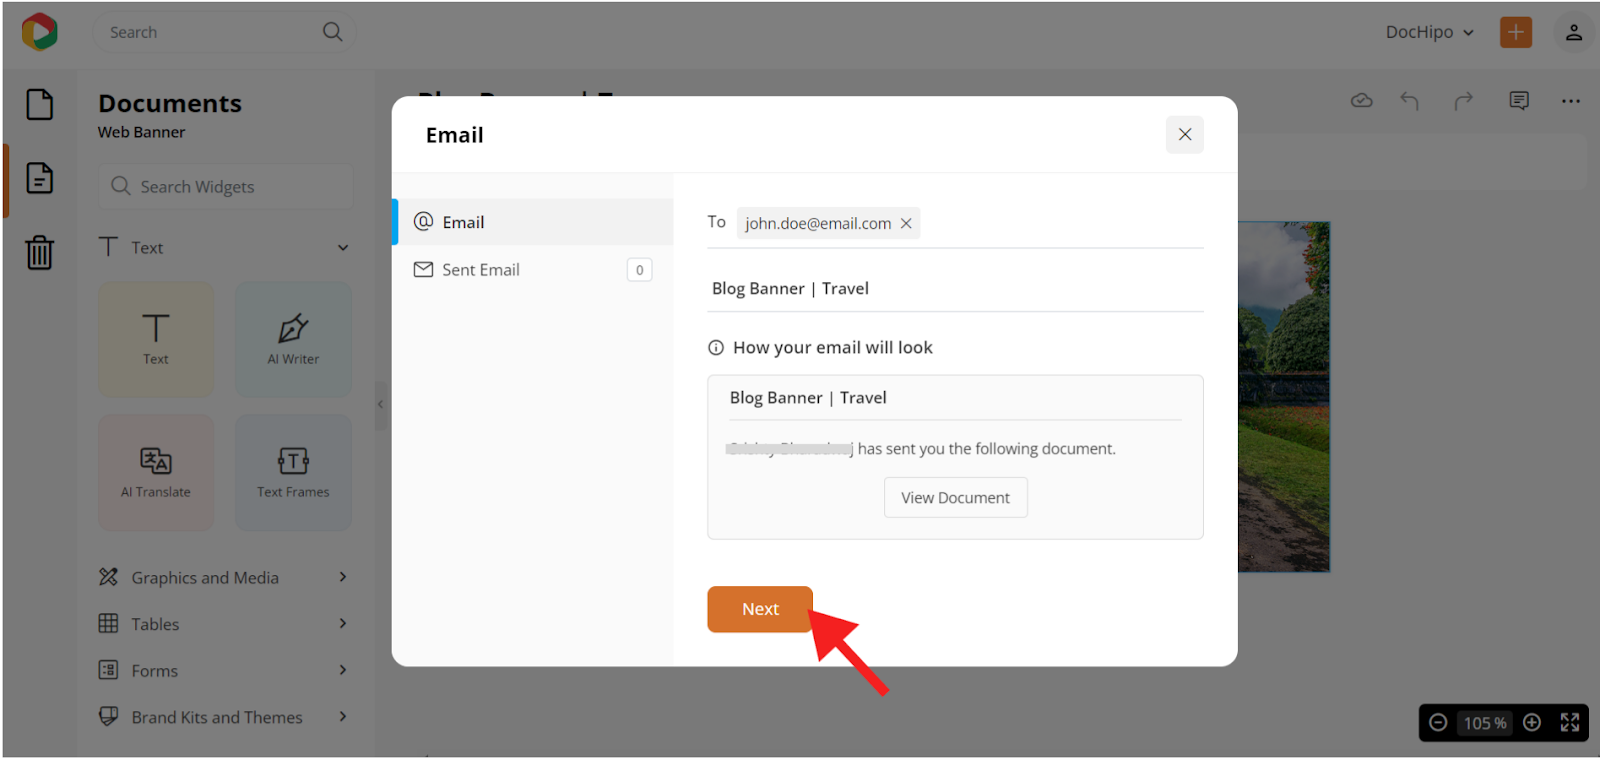 Email sharing in DocHipo